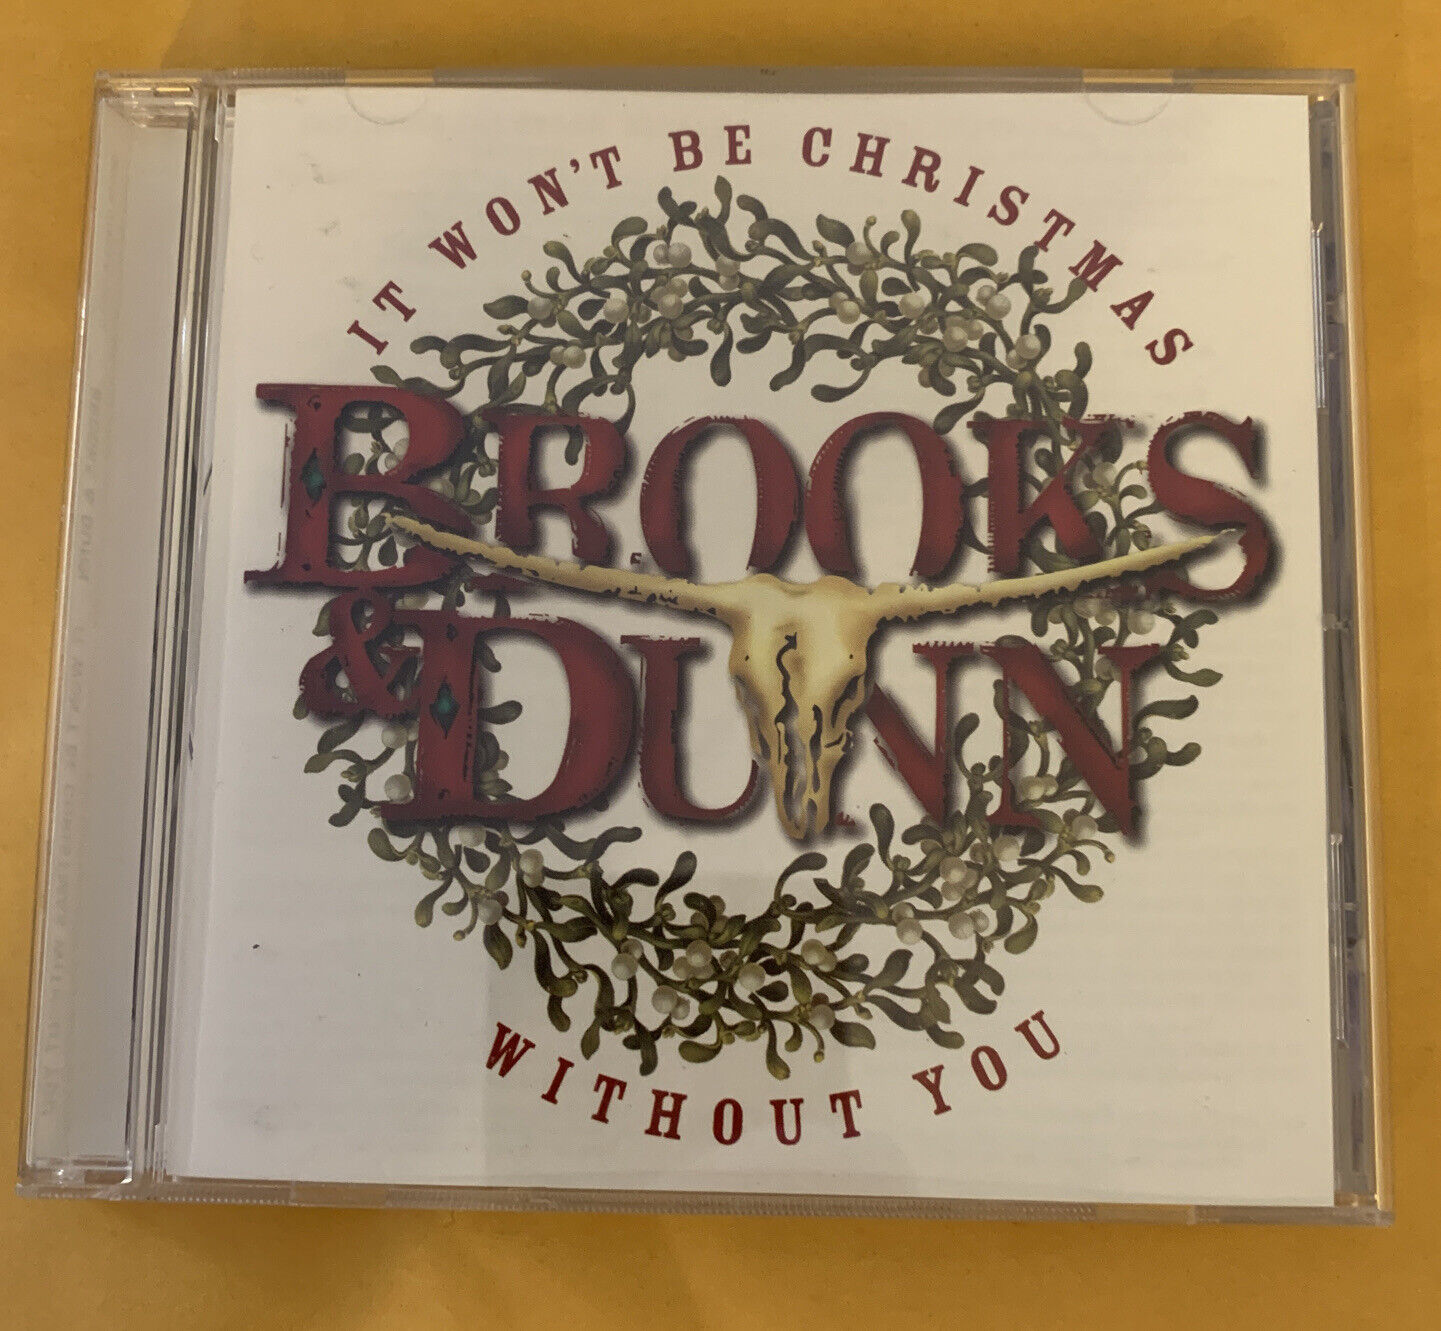  It Won't Be Christmas Without You by Brooks & Dunn (CD, Oct-2002, Arista)